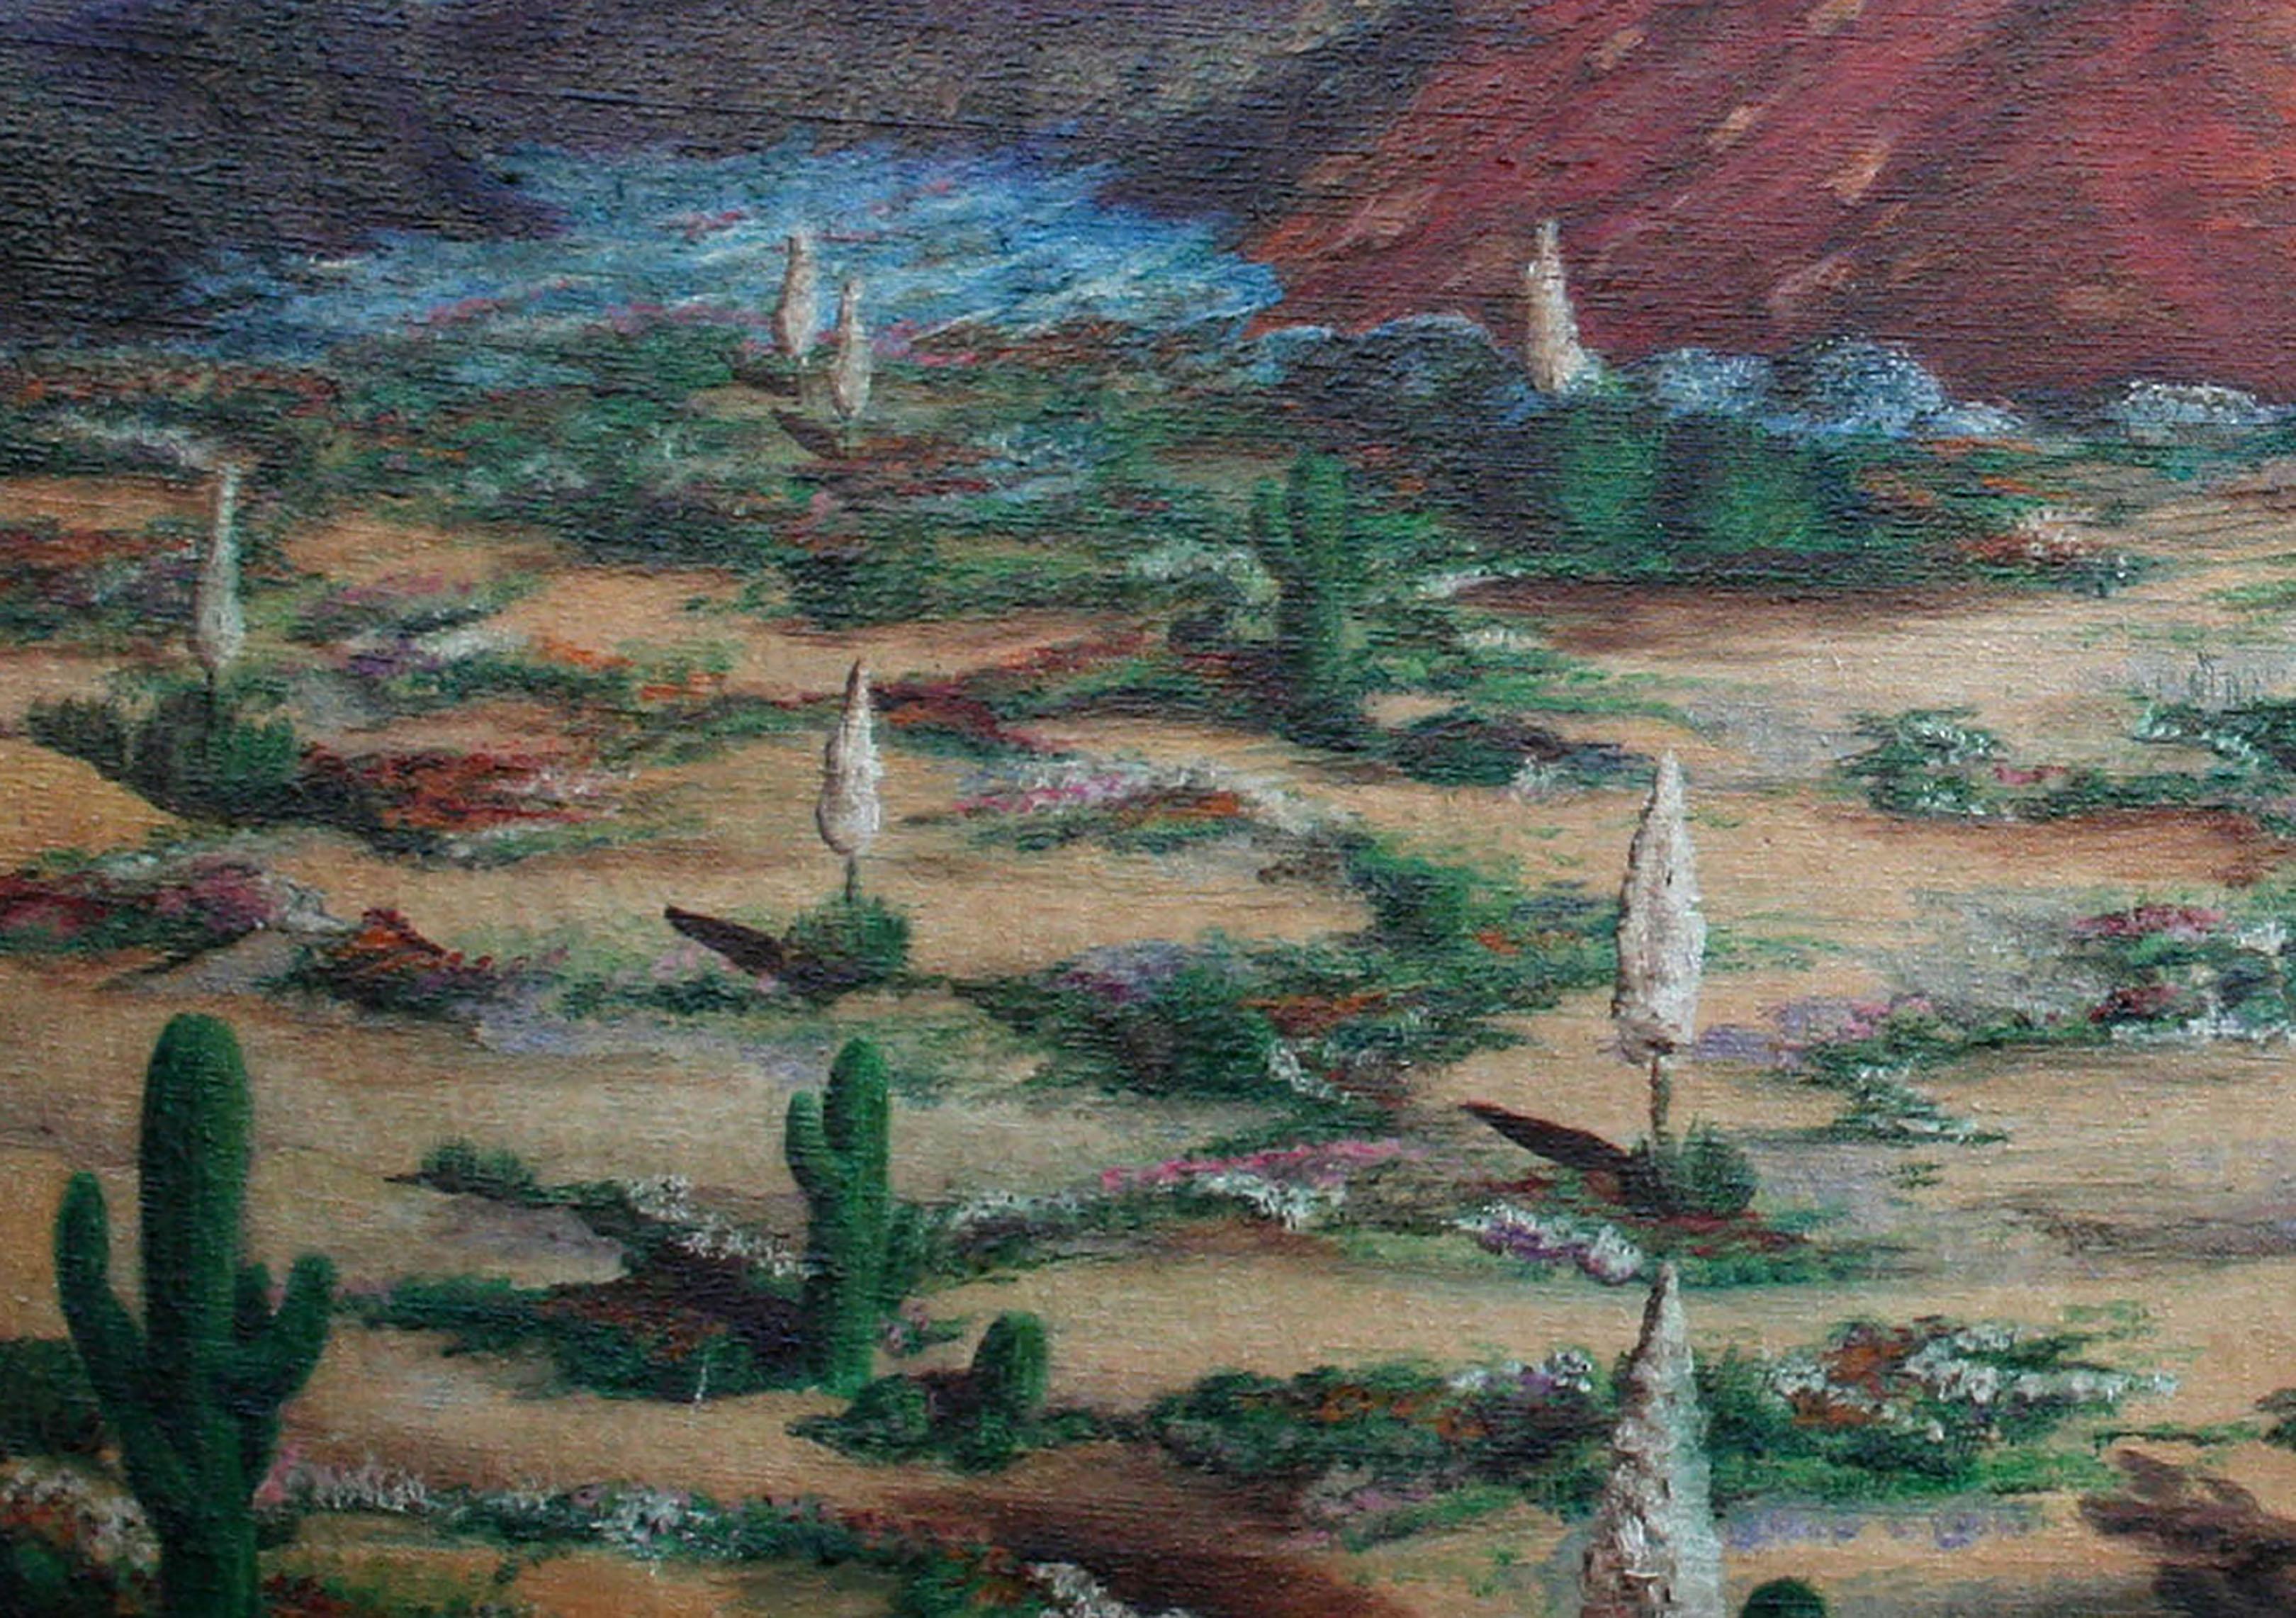 Mid Century Southwest Desert Landscape in Oil on Canvas

Vast Southwest plein air landscape of a desert scene with mountains, cacti, and other desert plants by California artist C. Gallagher (American, 20th century). The foreground is full of desert